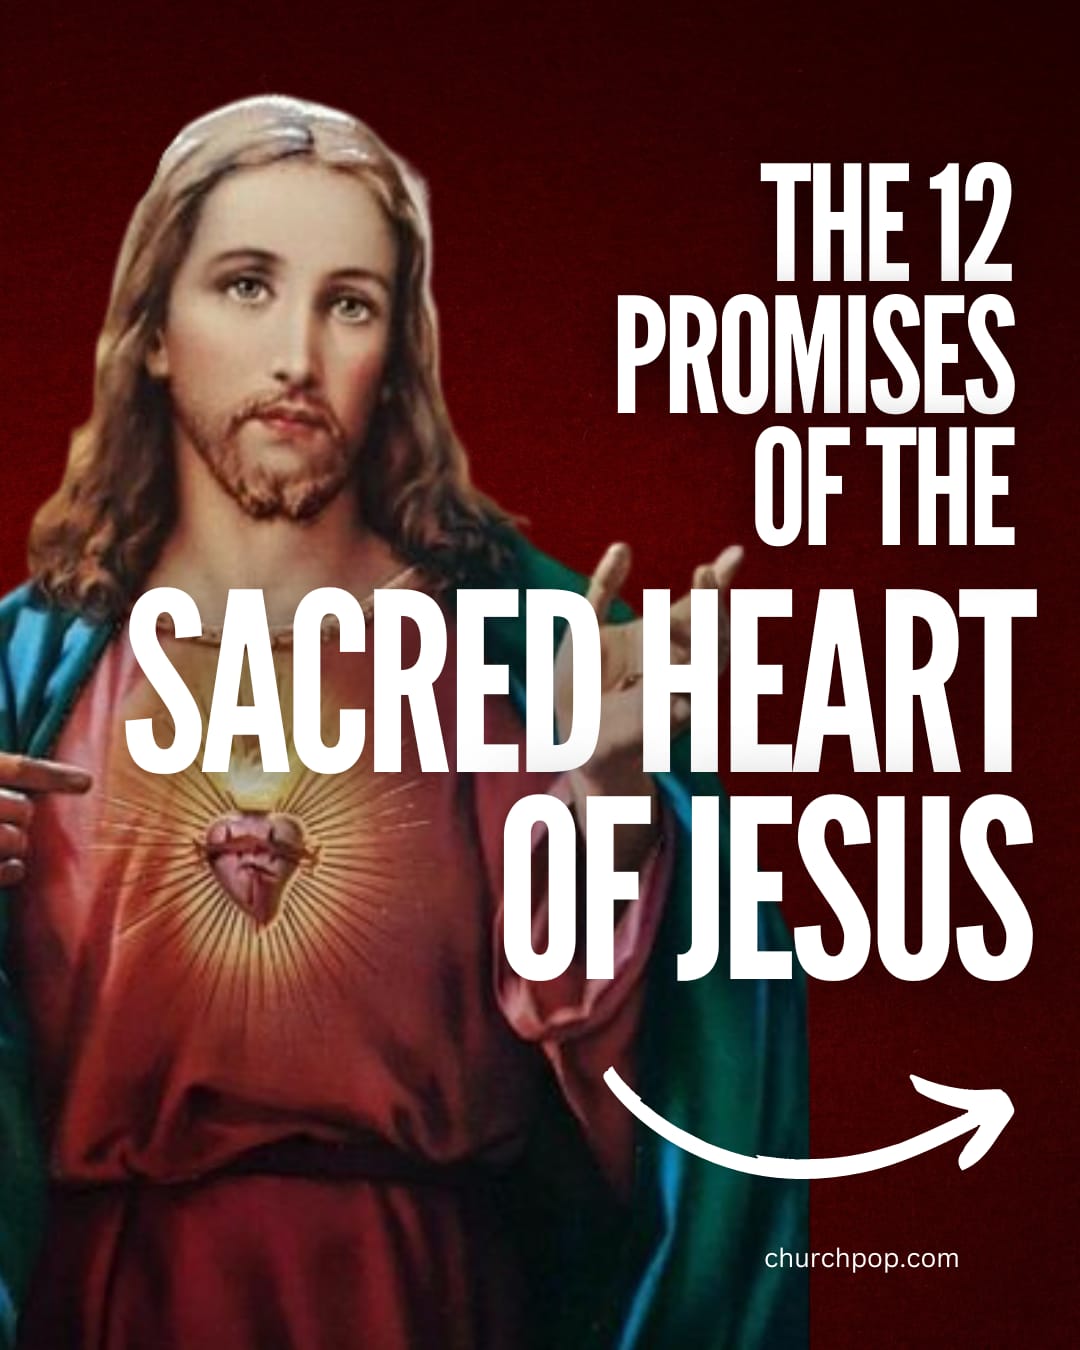 The 12 Promises of the Devotion to the Sacred Heart of Jesus